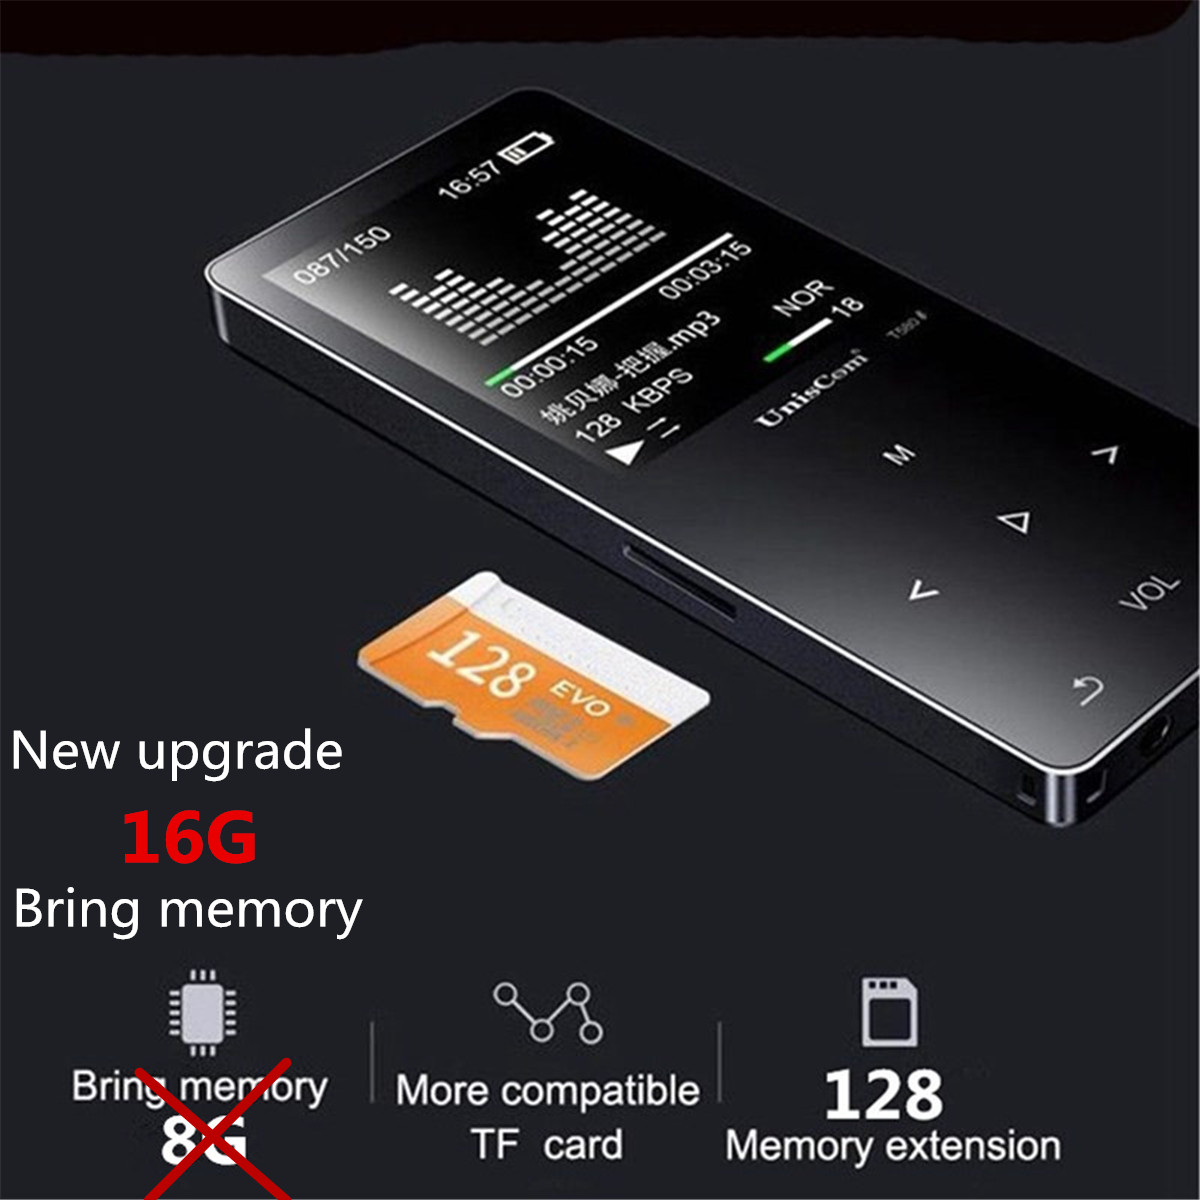 Uniscom 8G 1.8 Inch Screen bluetooth Lossless HIFI MP3 Music Player Support A-B Repeat Voice Record 63